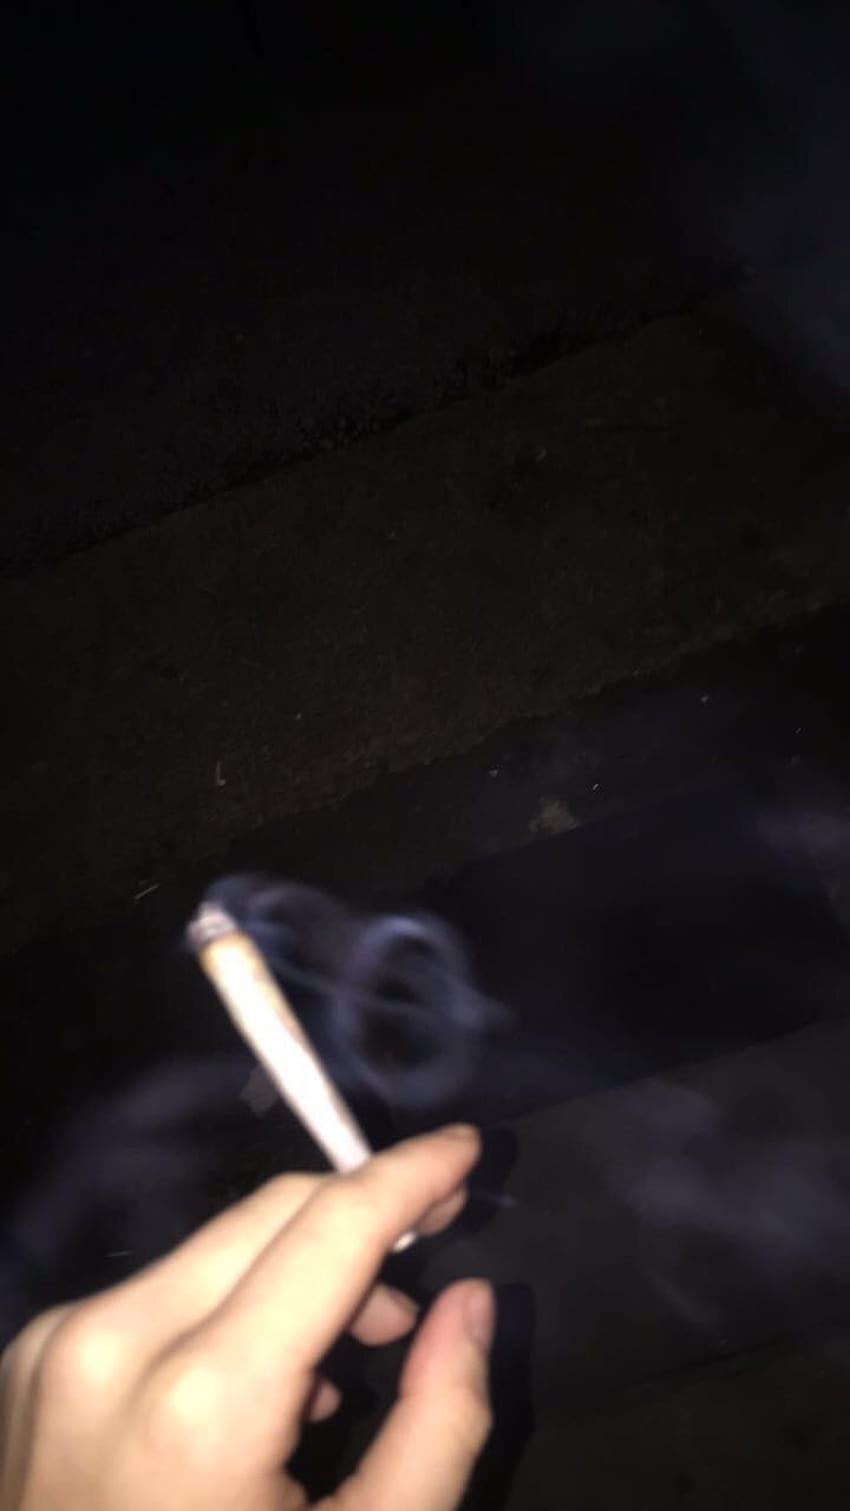 A person holding up their cigarette in the dark - Smoke